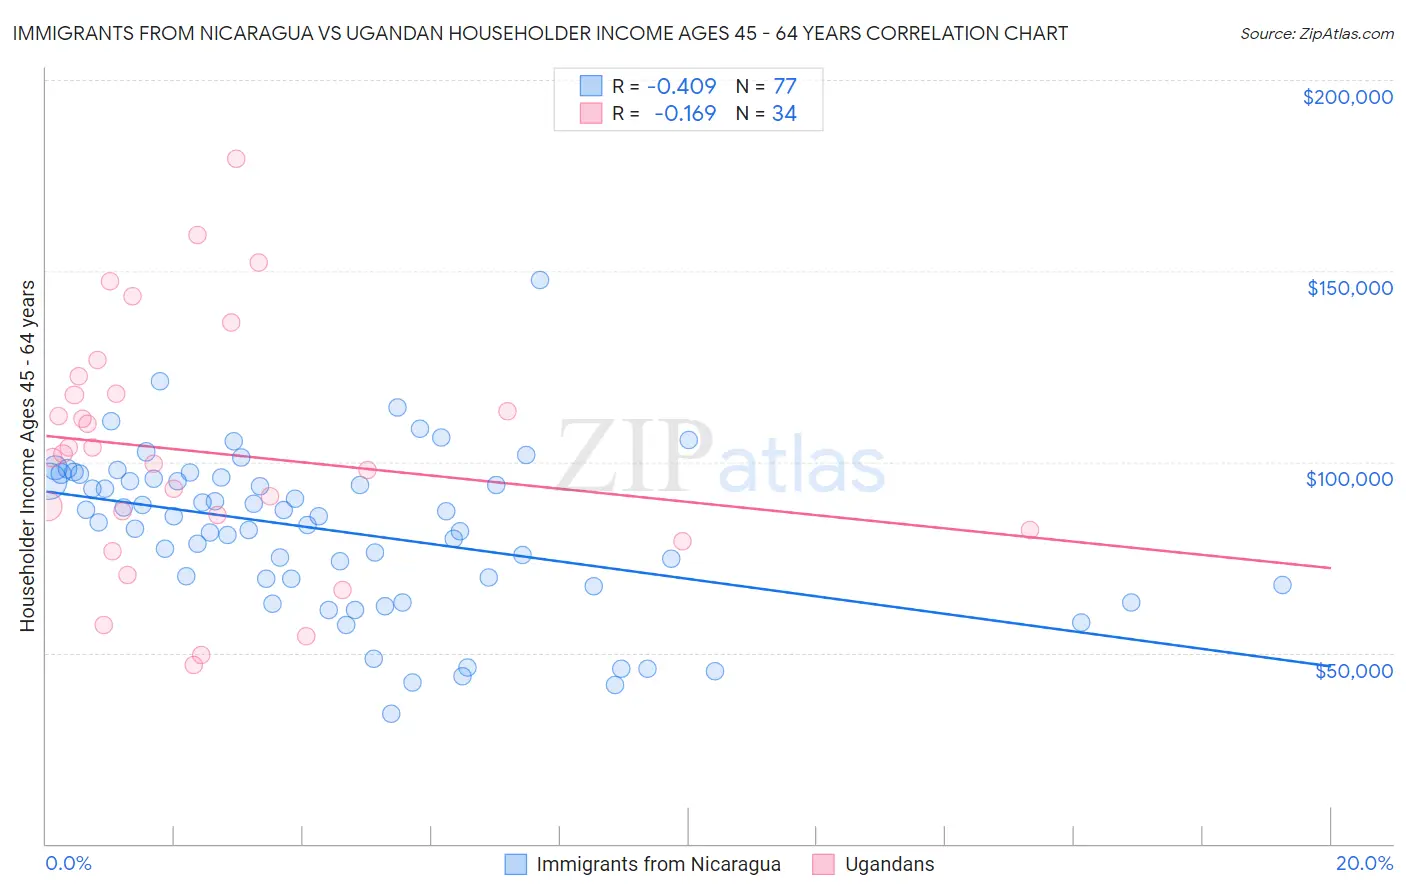 Immigrants from Nicaragua vs Ugandan Householder Income Ages 45 - 64 years